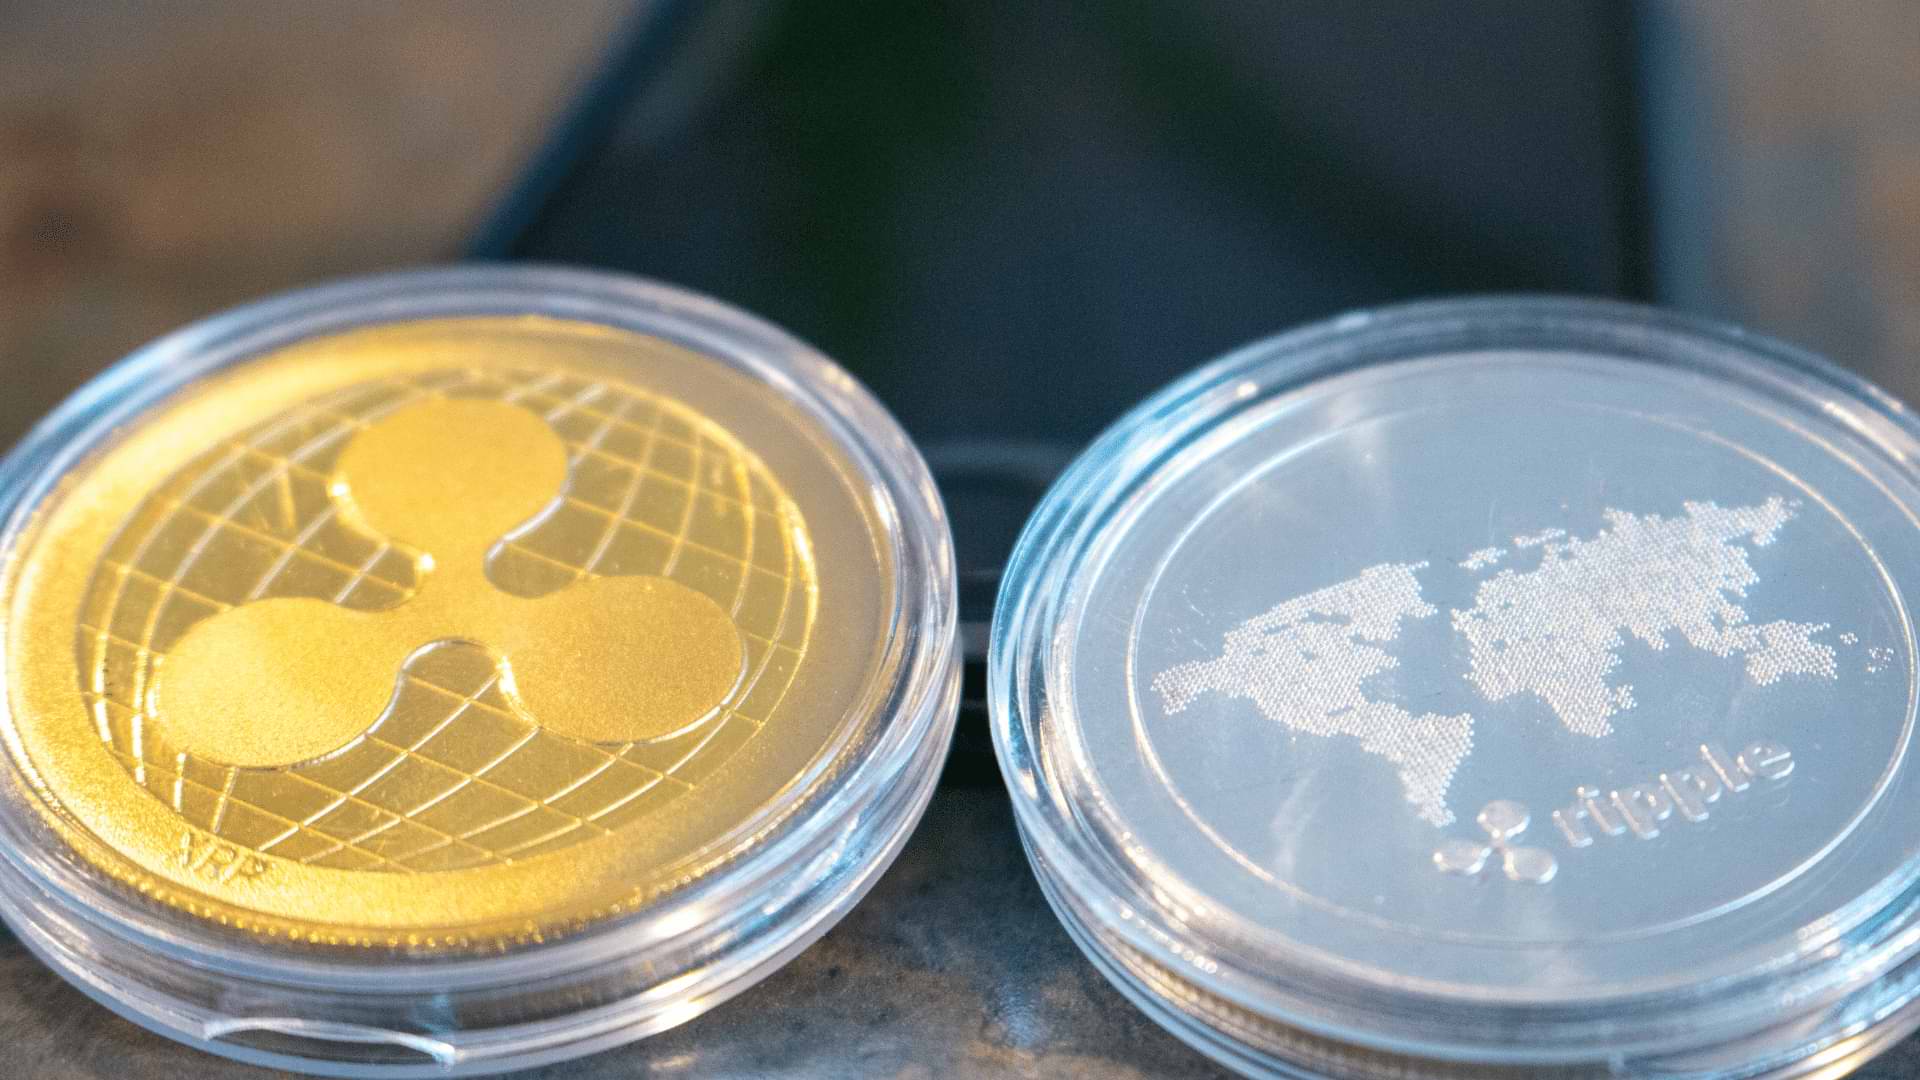 Ripple (XRP) Cryptocurrency 